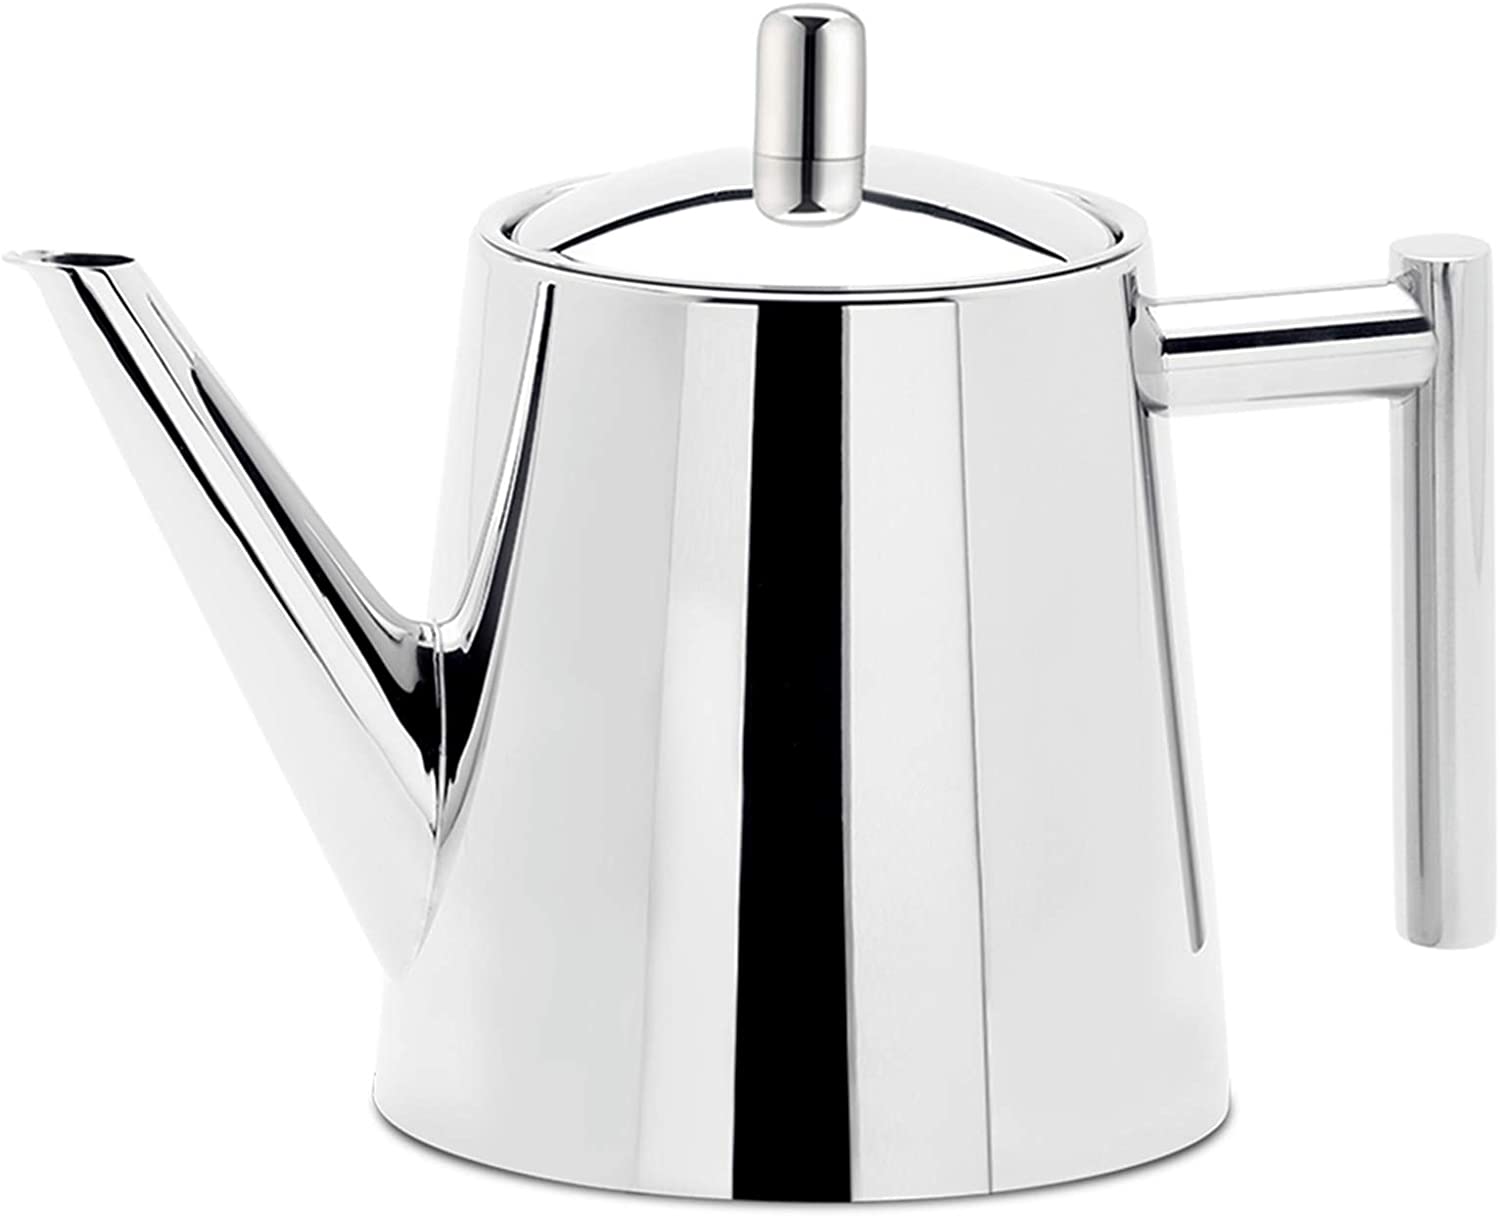 Easyworkz Teapot with Strainer Insert 1500 ml Stainless Steel Tea Maker for All Fruits, Herbal and Infusion Tea